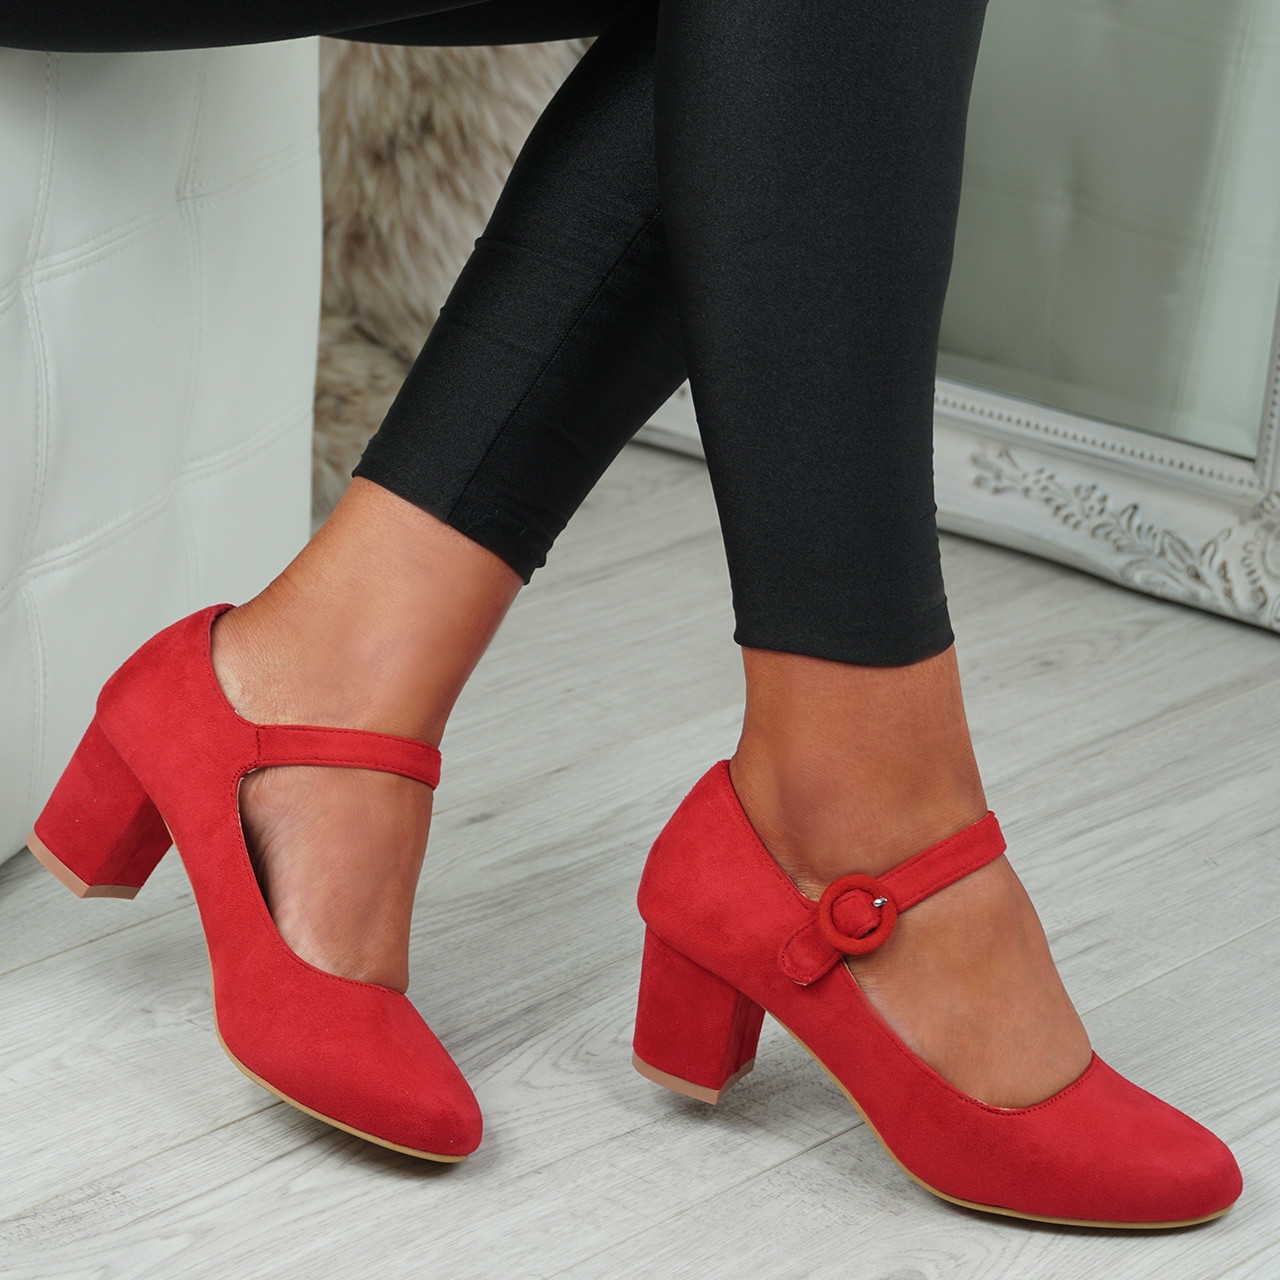 red mary jane shoes heels